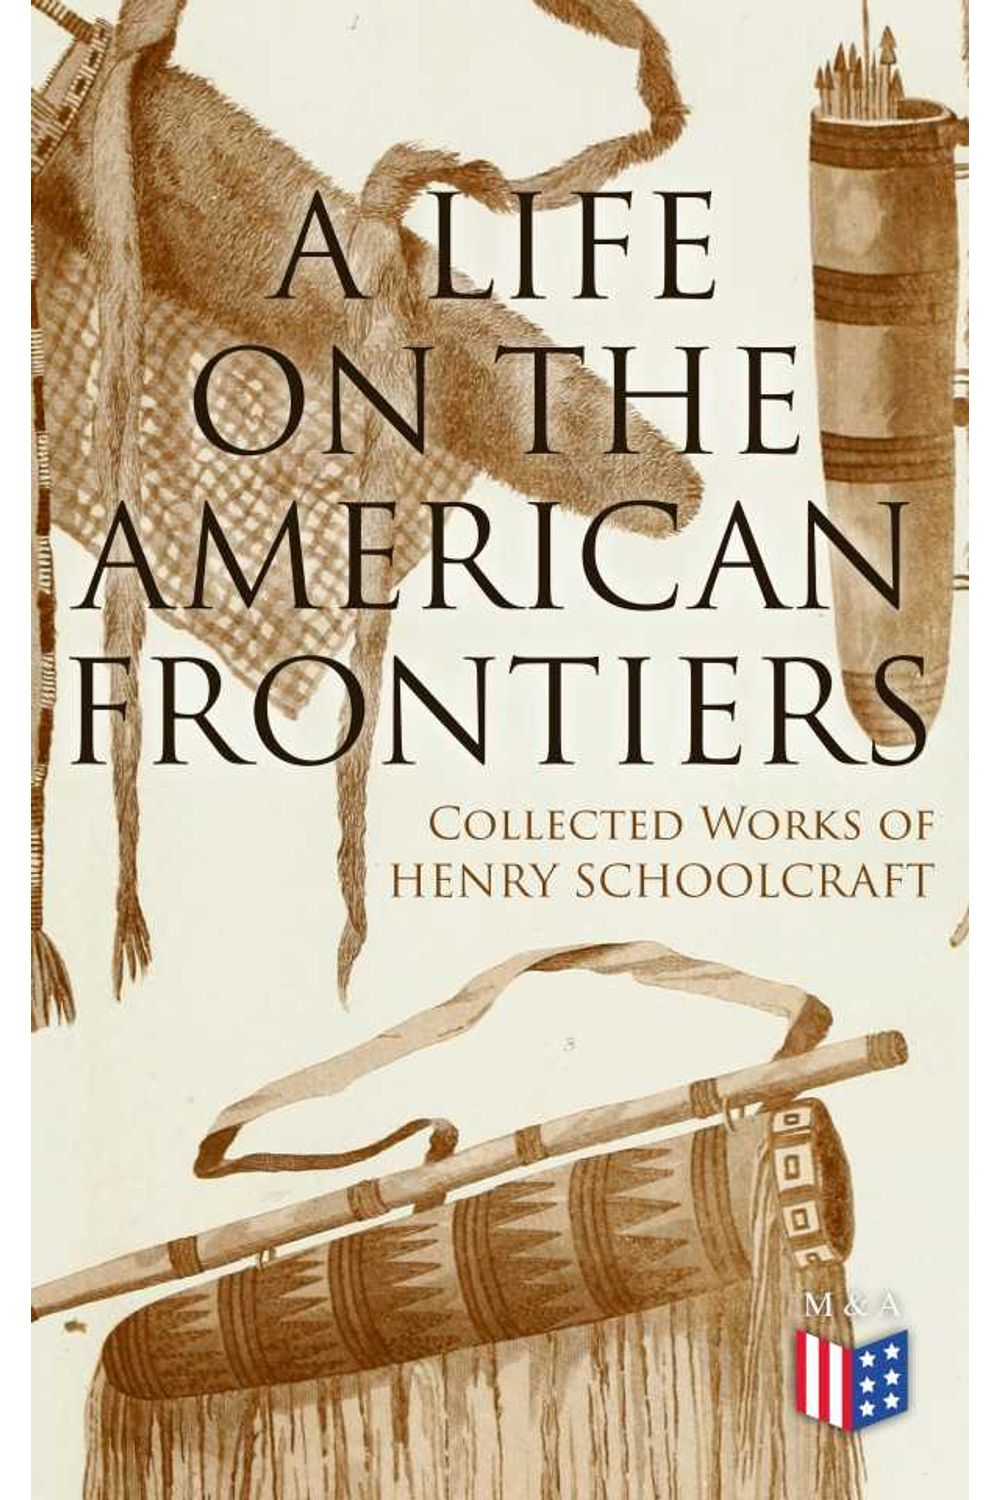 bw-a-life-on-the-american-frontiers-collected-works-of-henry-schoolcraft-madison-adams-press-4064066383756